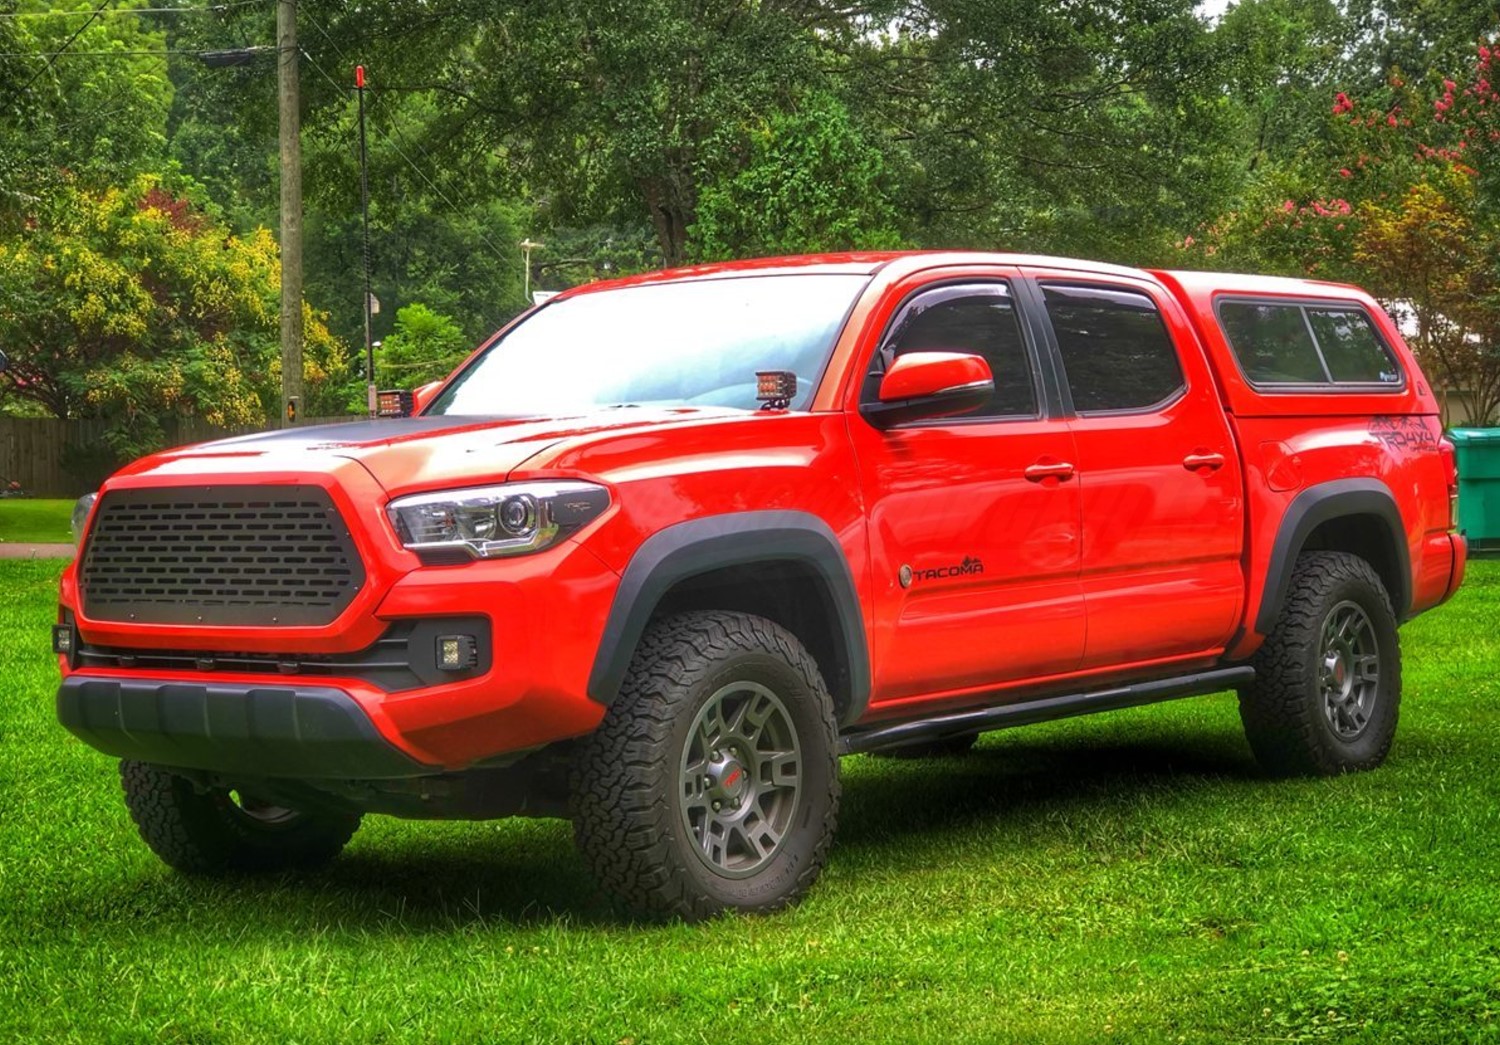 Inferno Toyota Tacoma's New Stainless Steel Grille: A Bold Choice